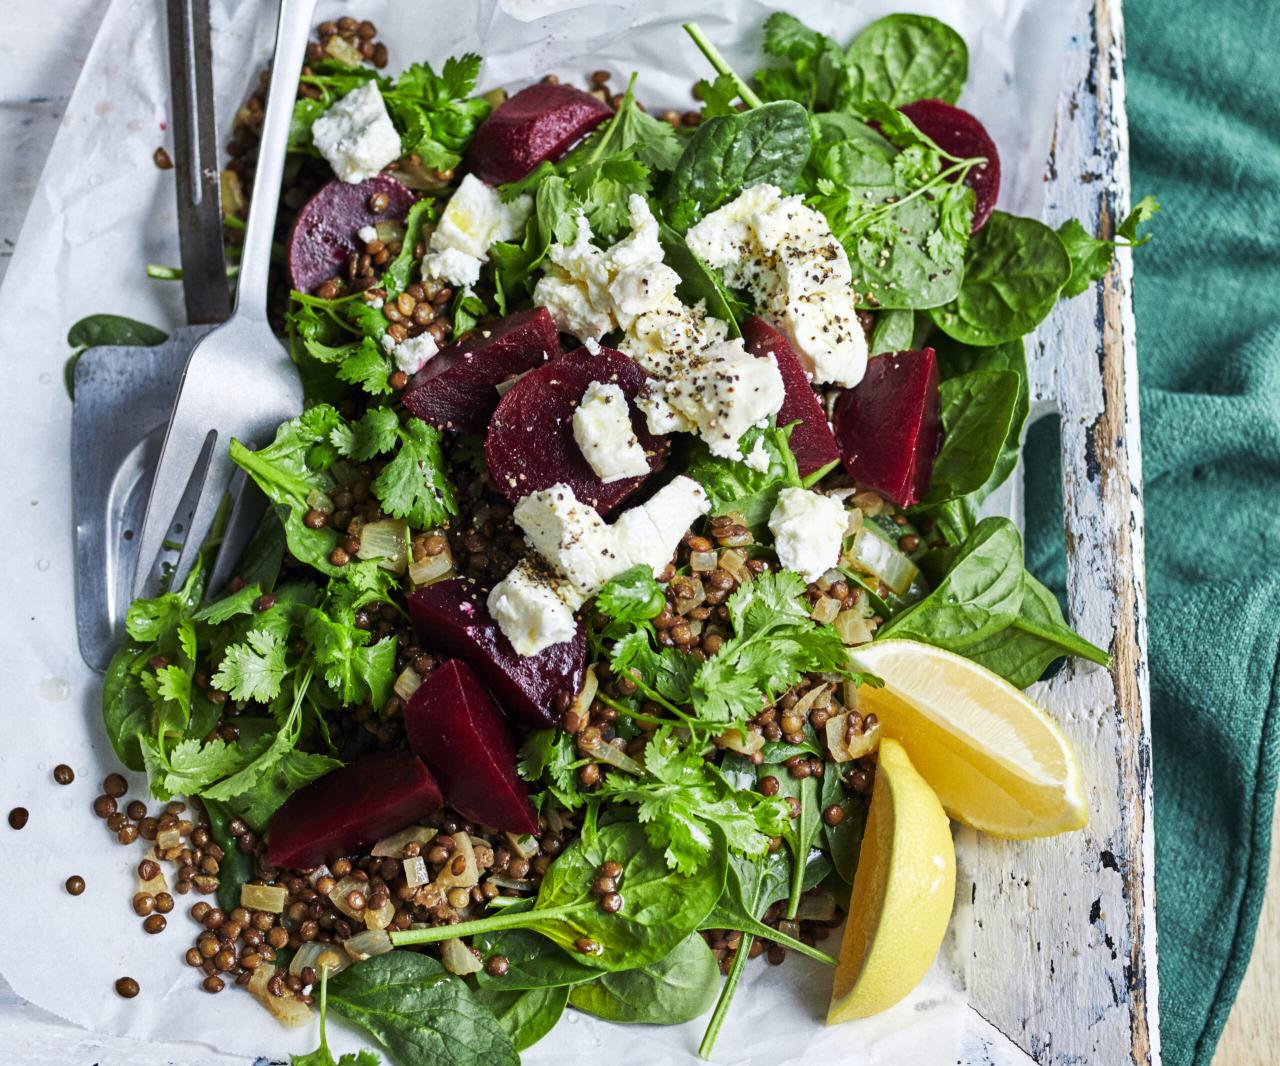 Spiced lentils and beetroot with dill yoghurt | Women's Weekly Food